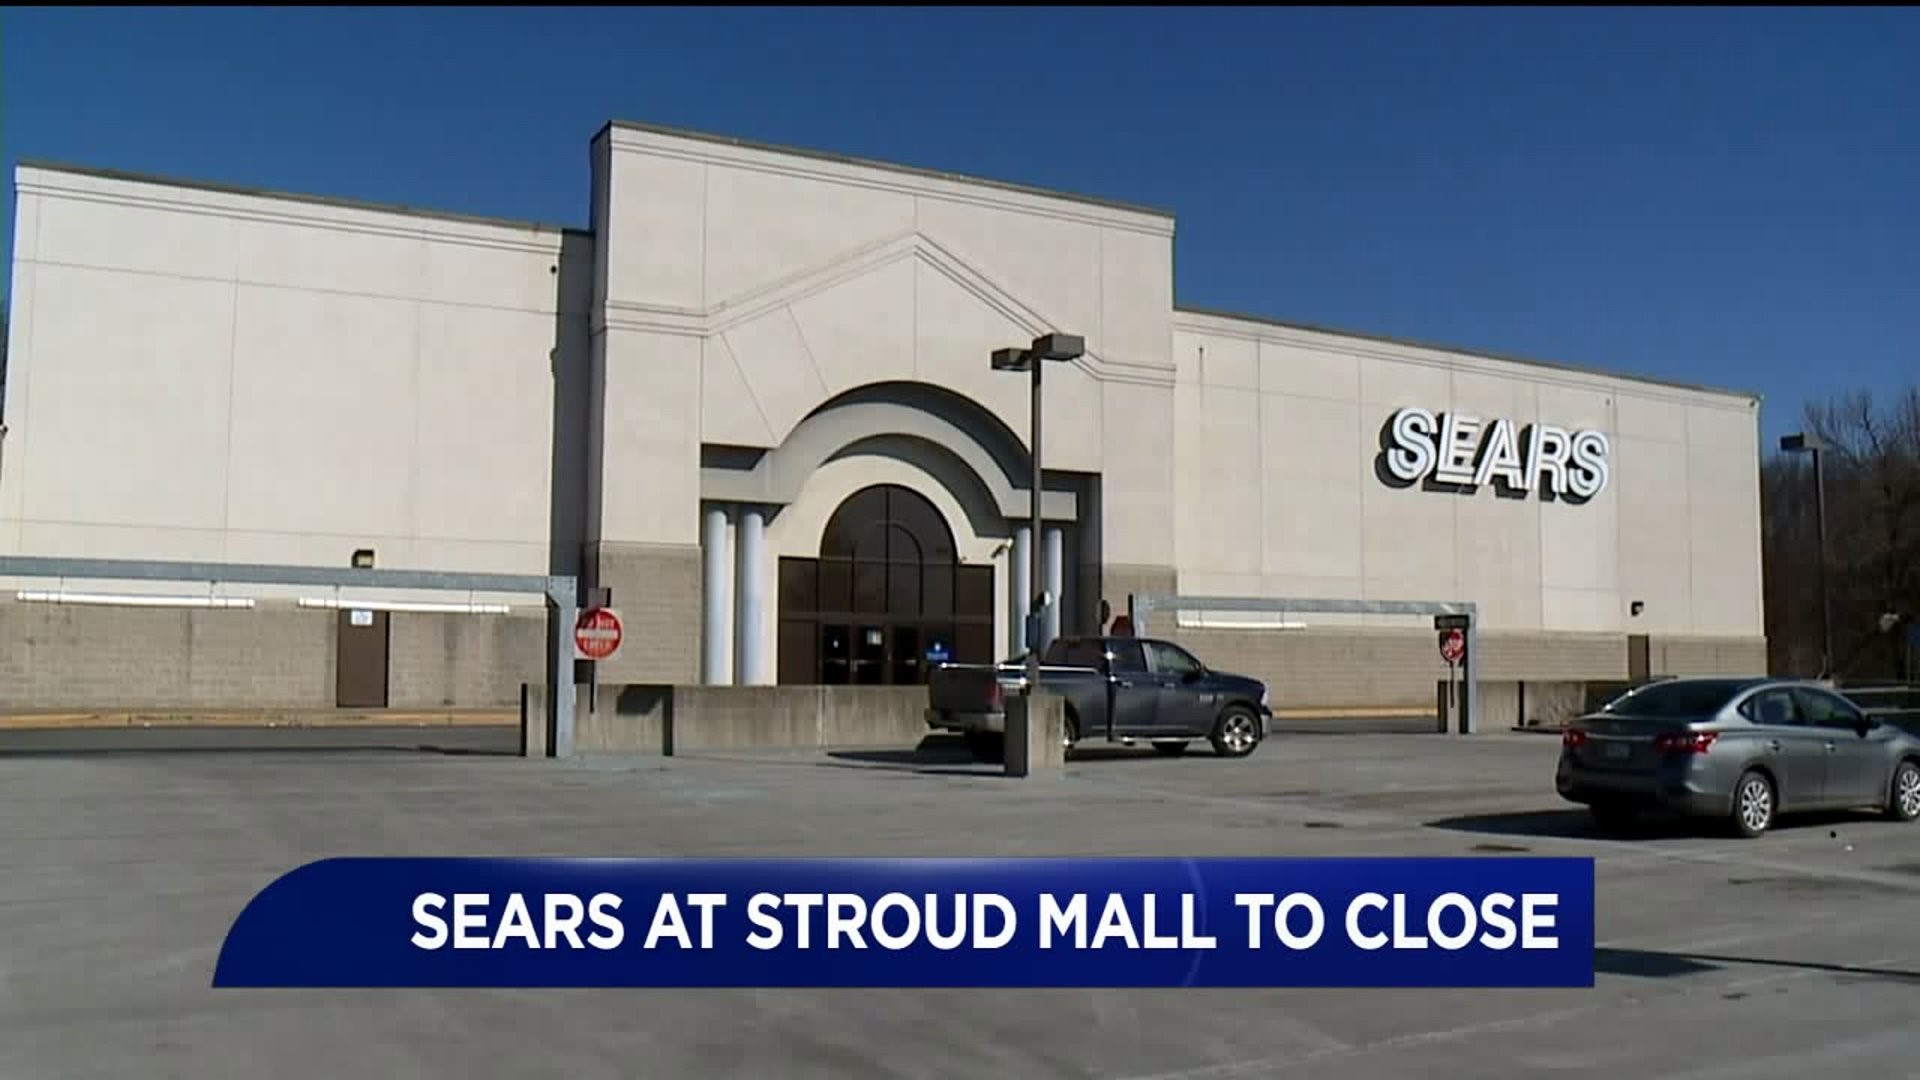 Sears at Stroud Mall to Close